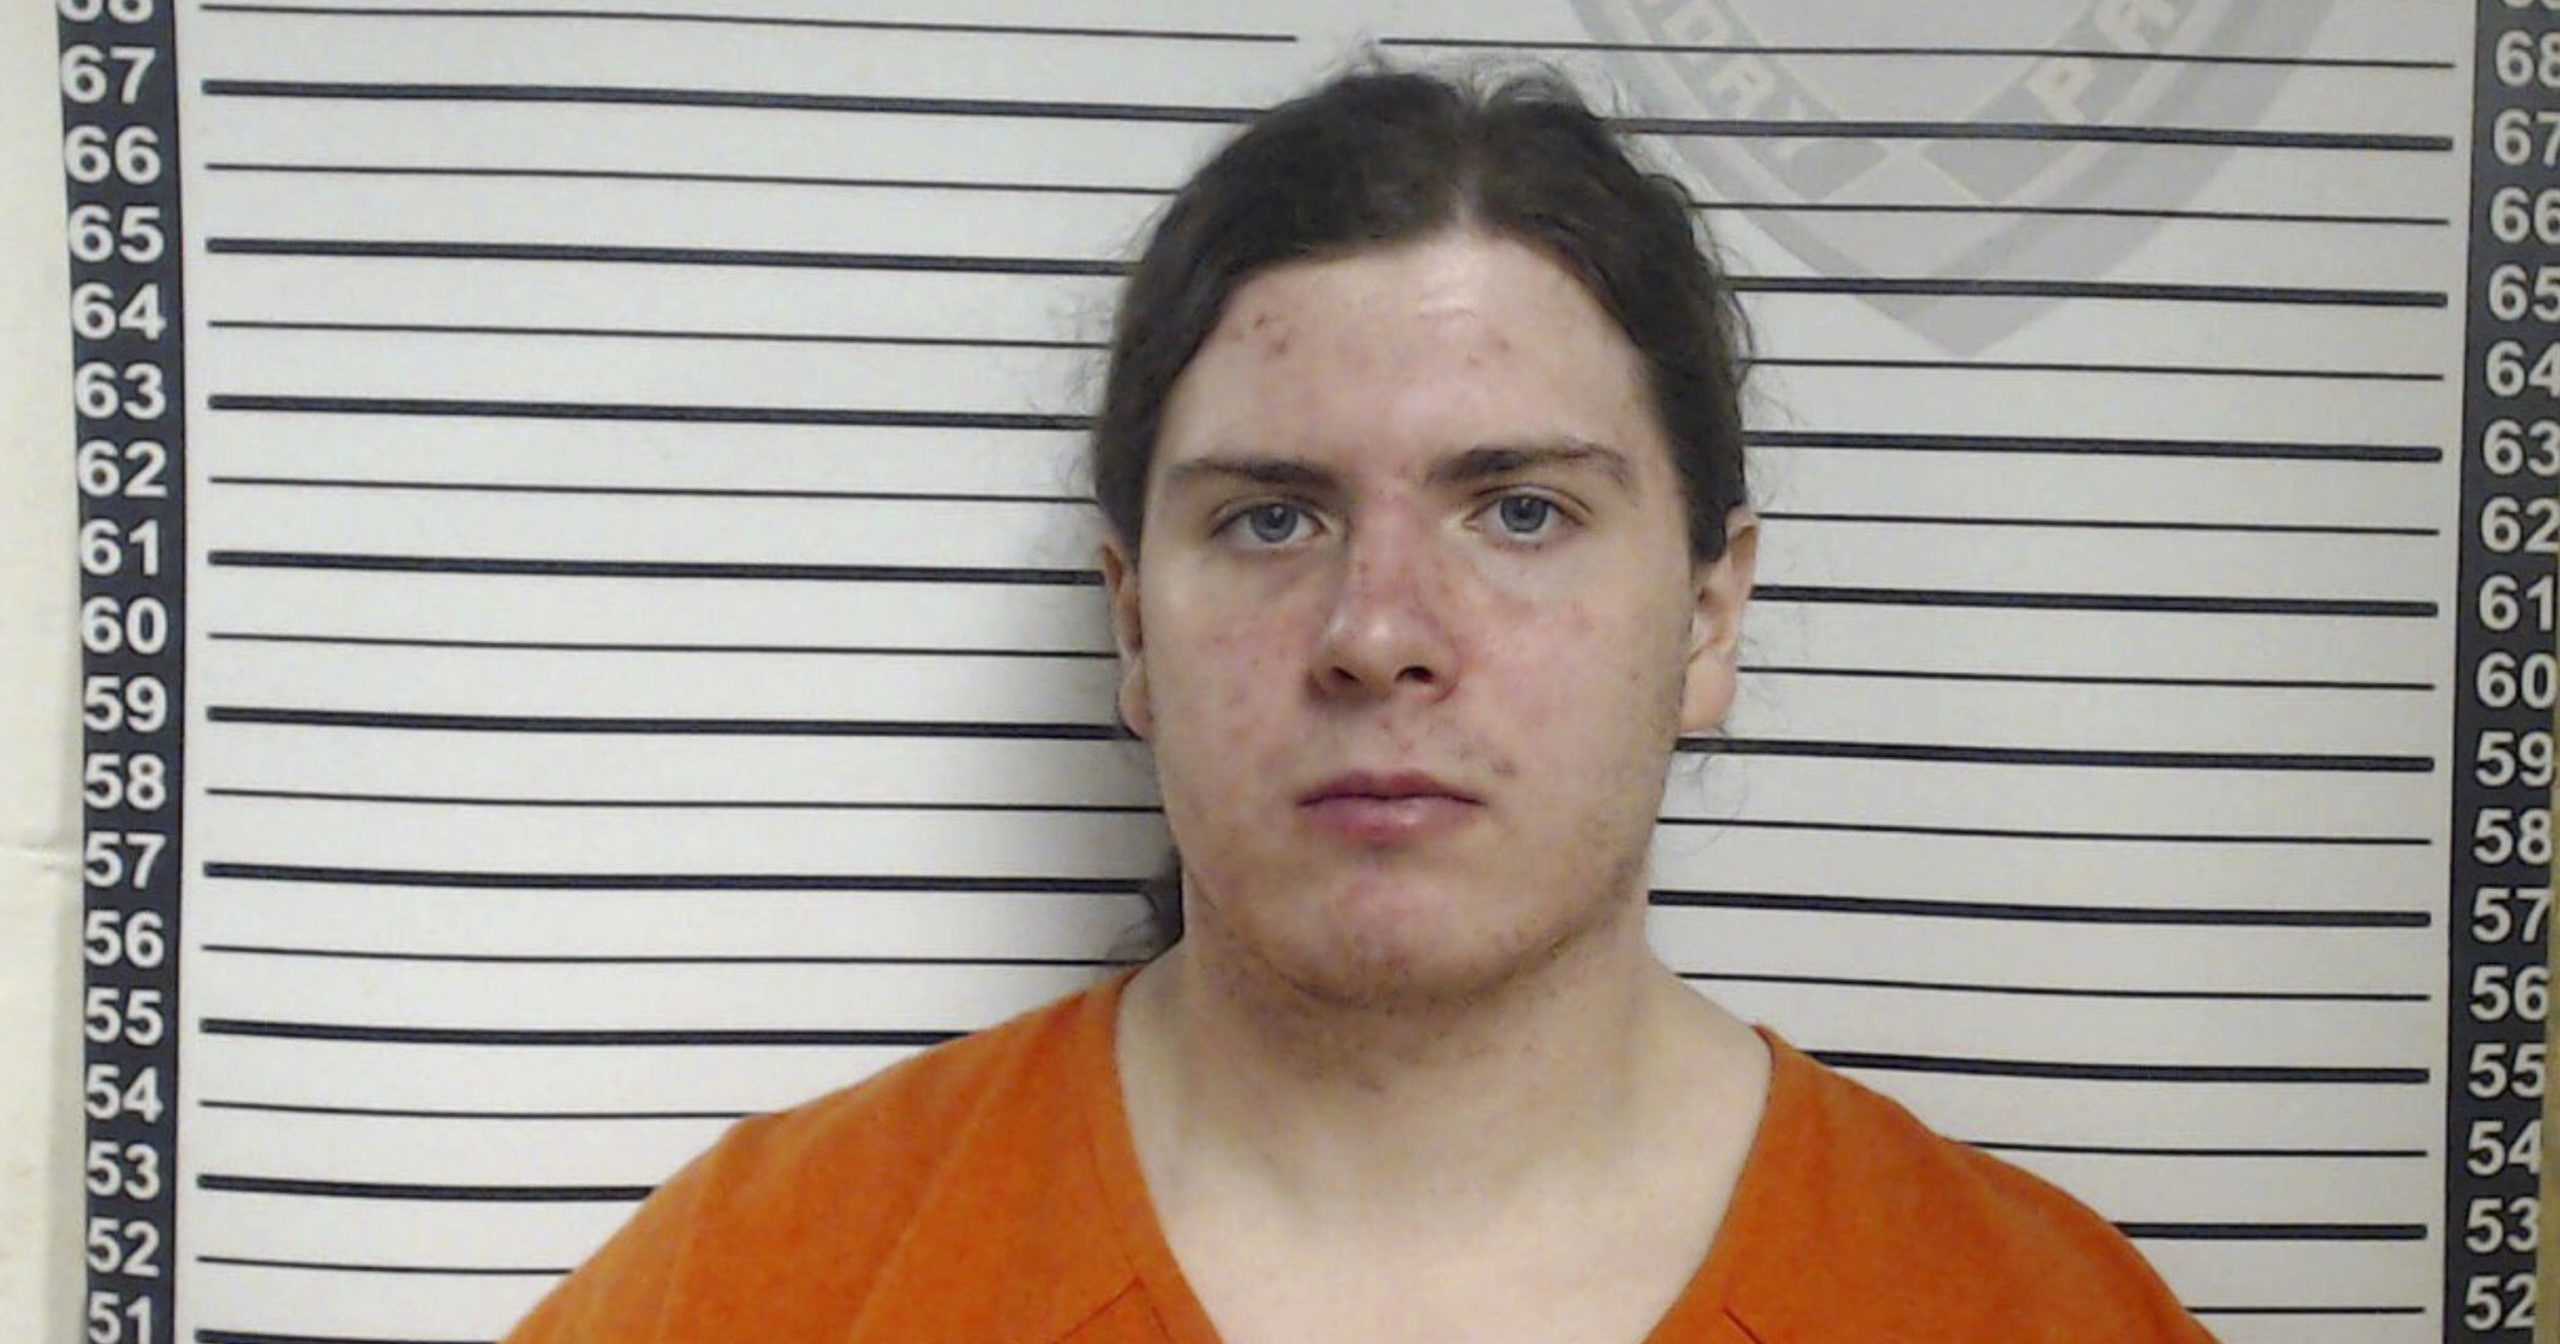 This photo provided by the Louisiana Office of State Fire Marshal shows Holden Matthews. Matthews, a Louisiana man who admitted to burning down three churches, was sentenced on Nov. 2, 2020, to 25 years in prison and ordered to pay the churches $2.6 million.